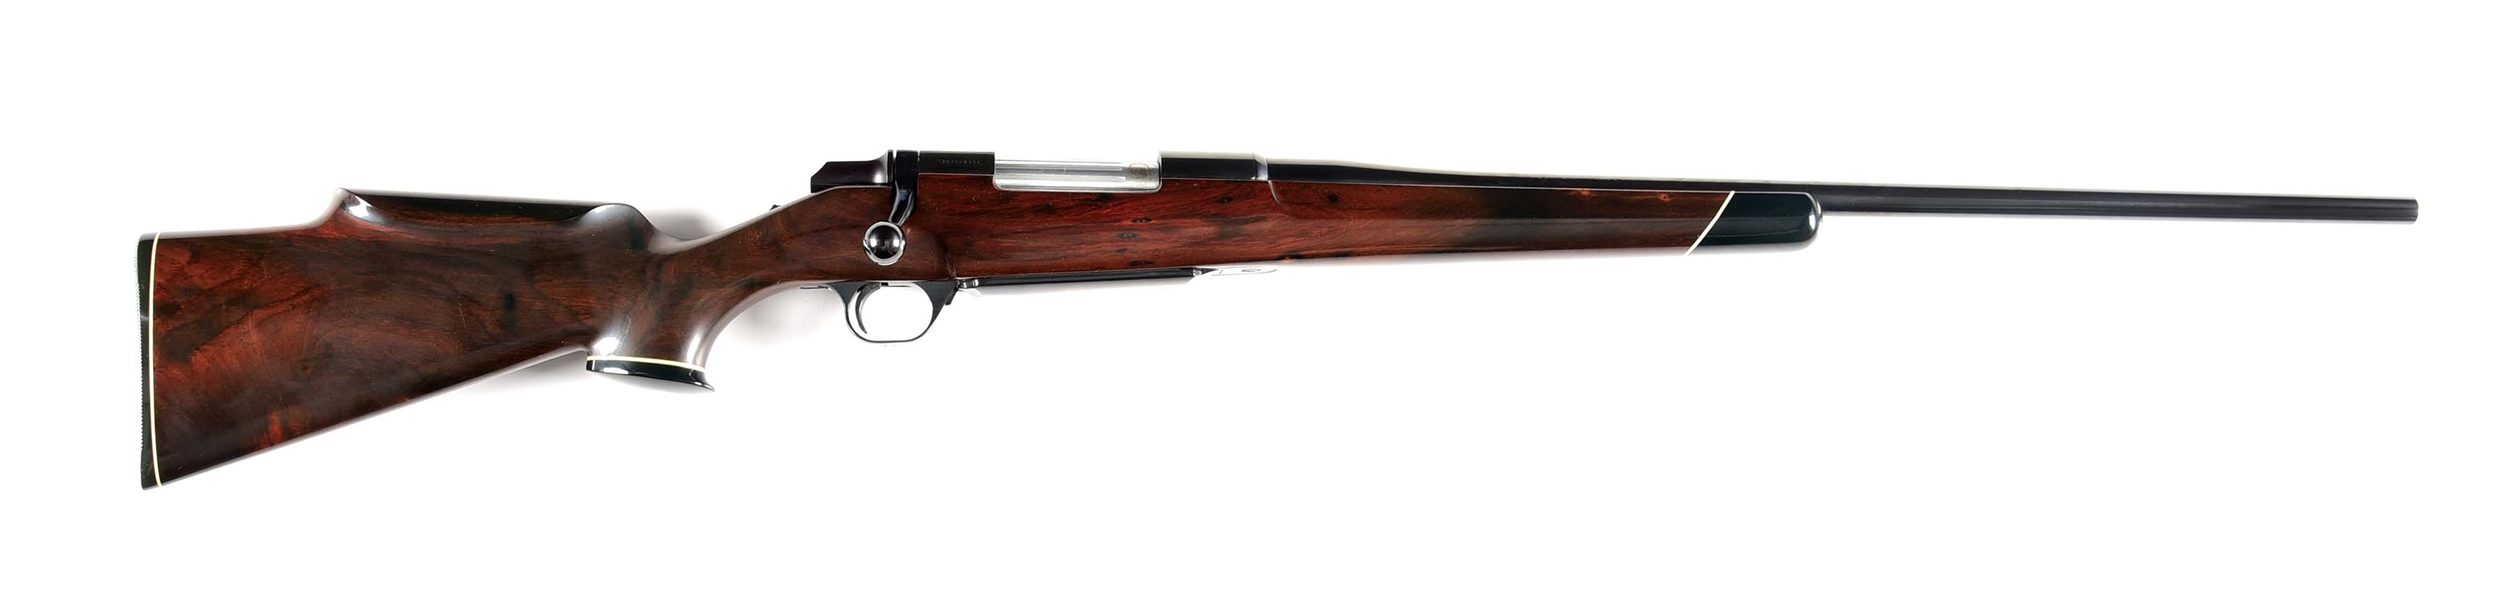 (M) INDIAN ROSEWOOD STOCKED BROWNING BBR BOLT ACTION RIFLE.